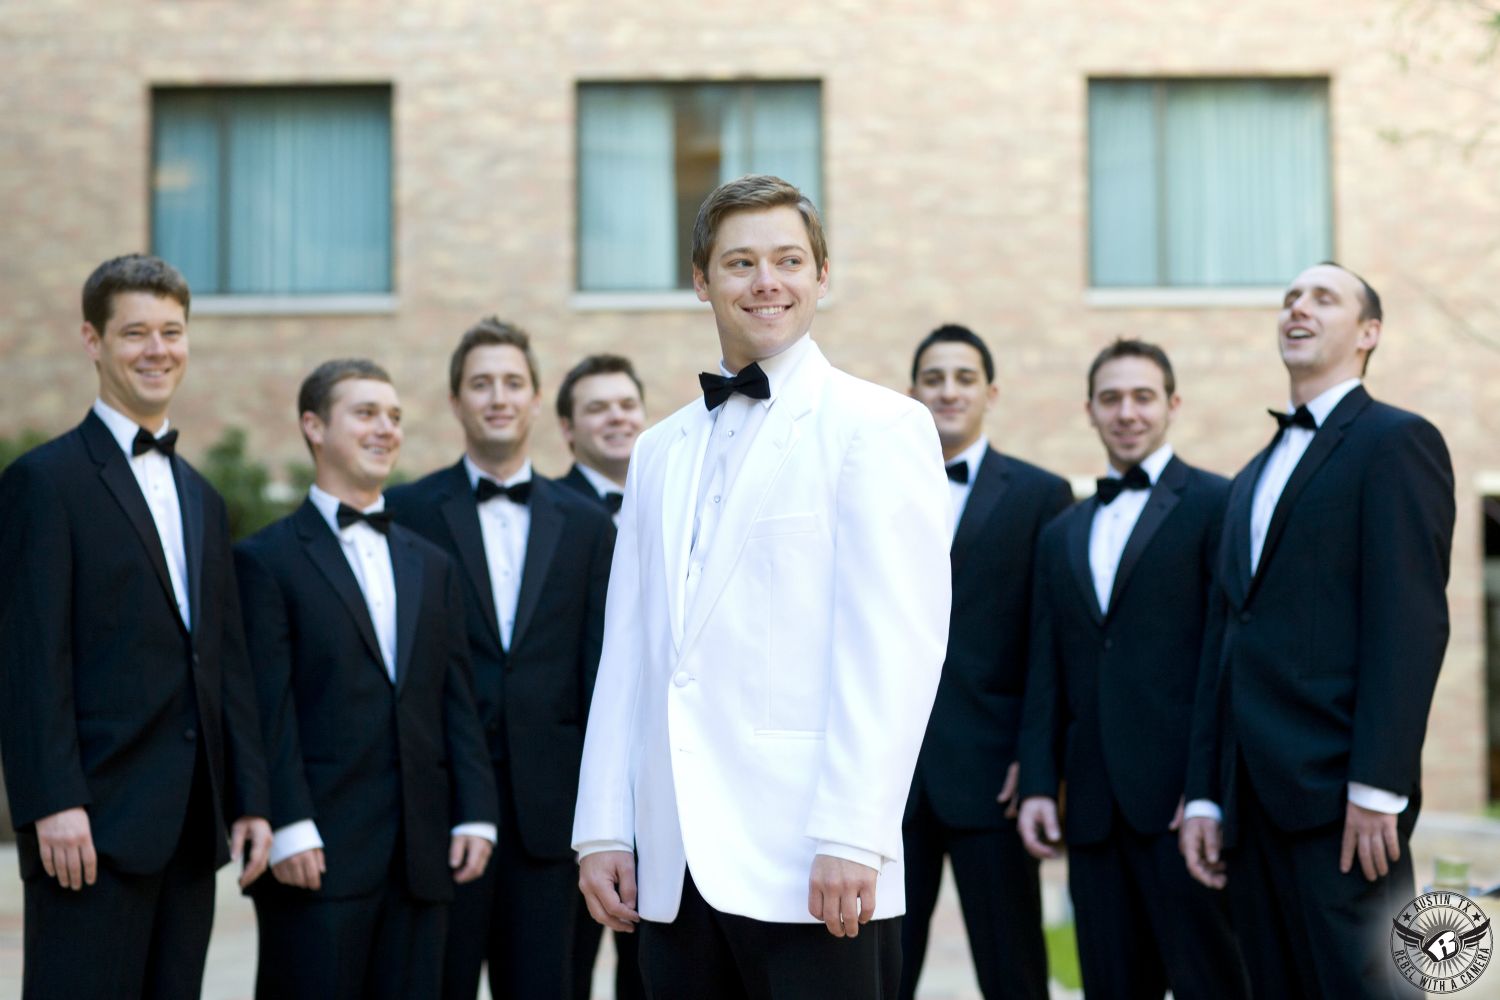 Austin wedding photography of stylish groom in white tuxedo jacket and black bowtie standing in front of groomsmen in black tuxedos at the AT&T Executive Education and Conference Center on the University of Texas at Austin campus.